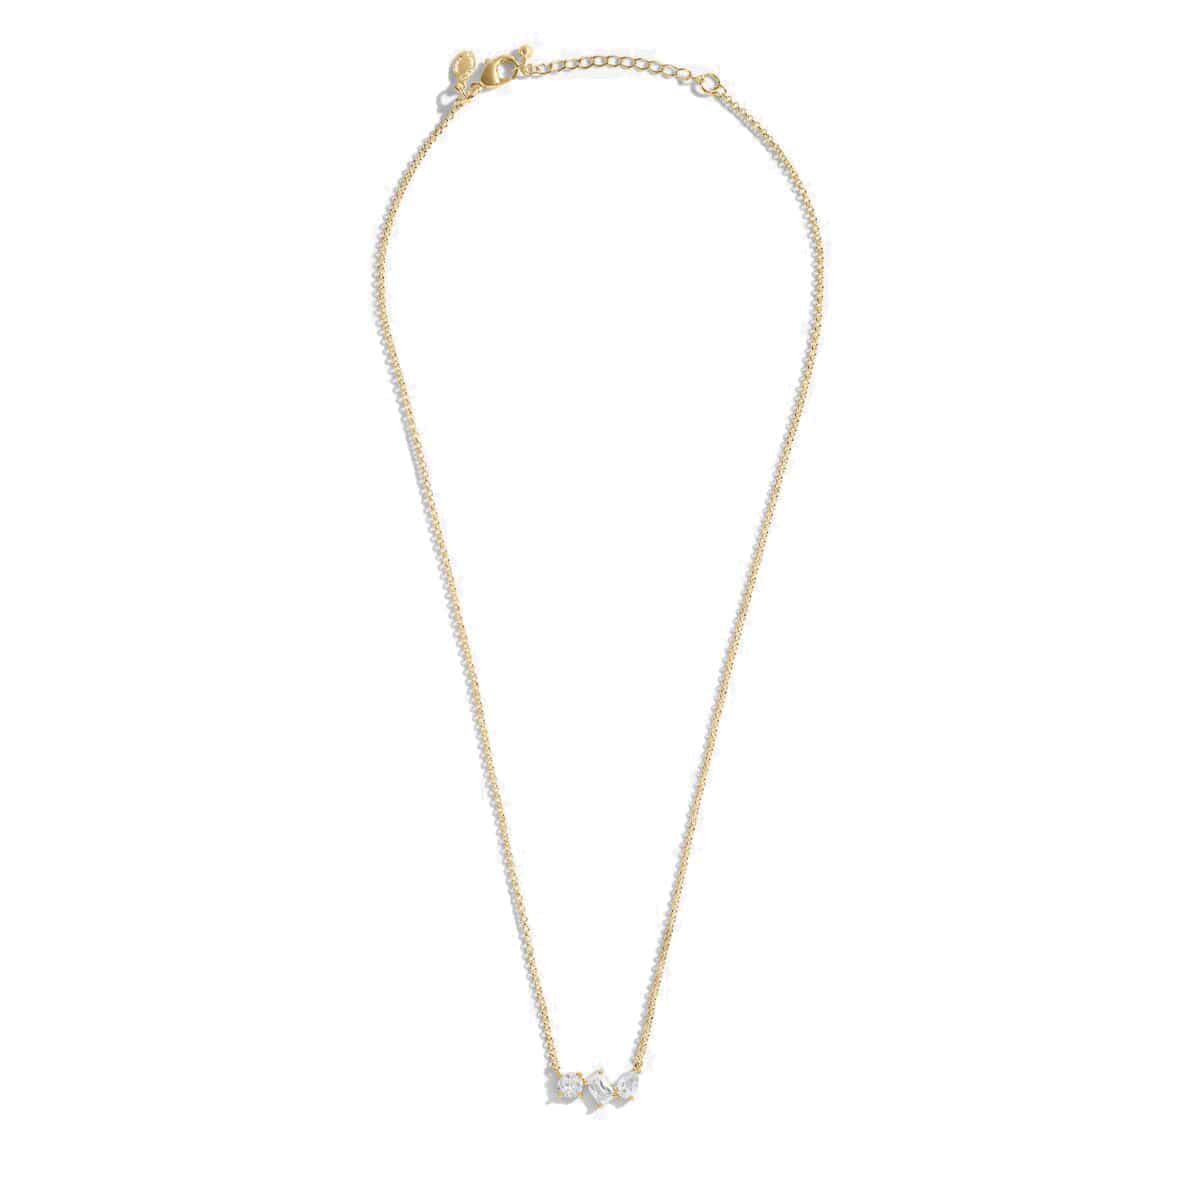 Joma Jewellery Necklace Joma Jewellery Love From Your Little Three Necklace - Gold Plated